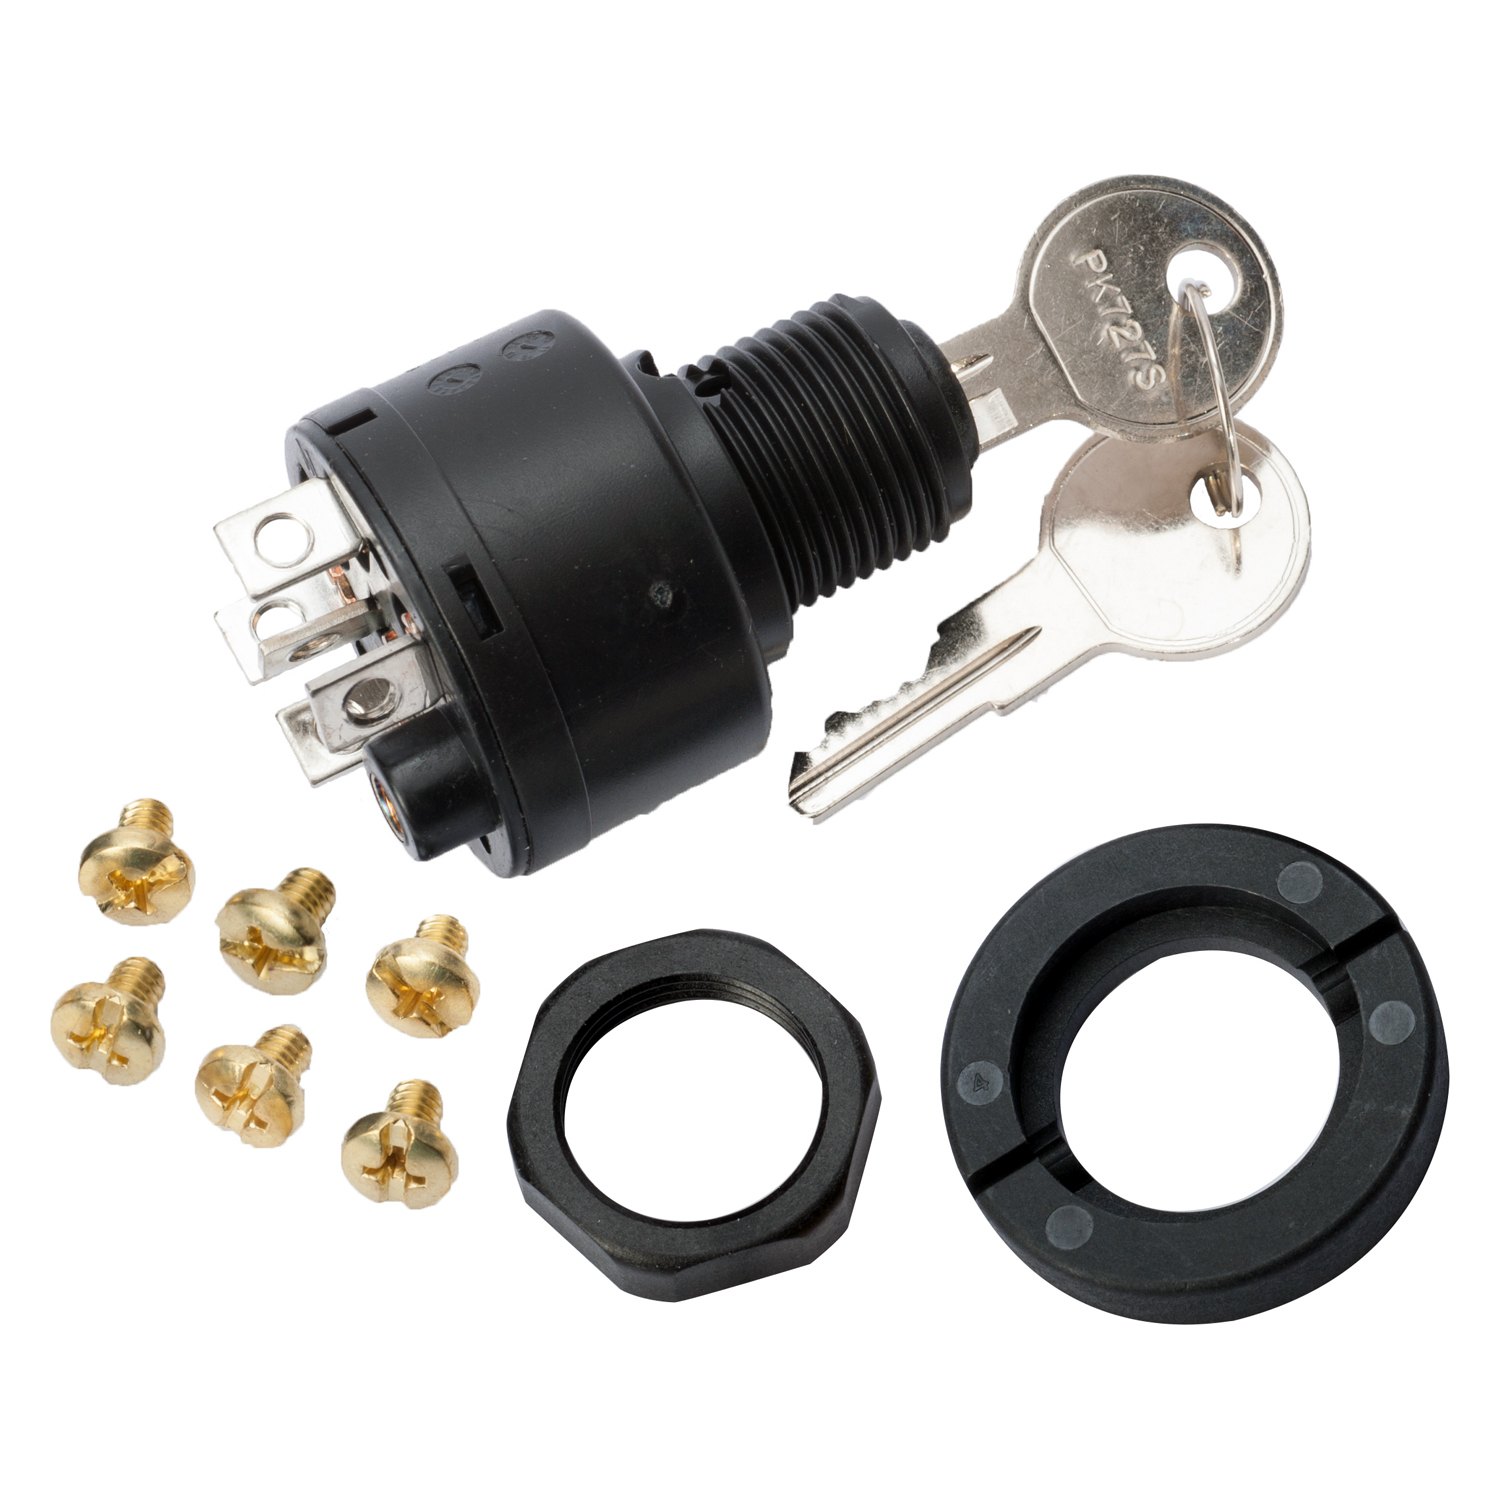 Sierra ® - Off-On-Ign 3-Position Ignition Switch with Choke for Johnson/Evi...